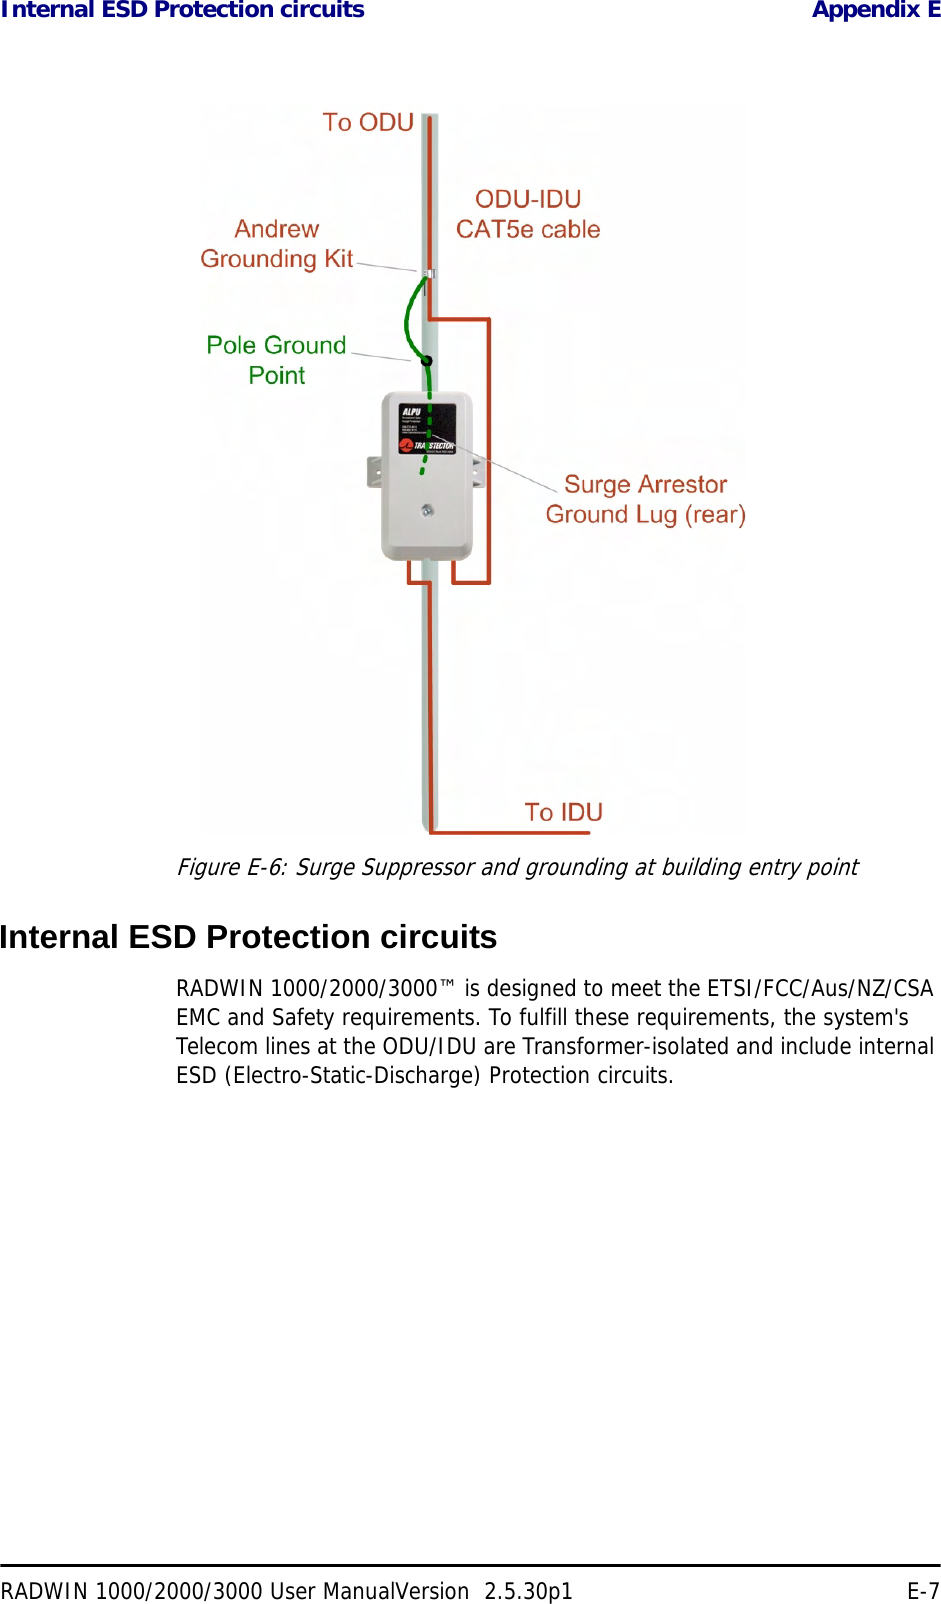 Internal ESD Protection circuits Appendix ERADWIN 1000/2000/3000 User ManualVersion  2.5.30p1 E-7Figure E-6: Surge Suppressor and grounding at building entry pointInternal ESD Protection circuitsRADWIN 1000/2000/3000™ is designed to meet the ETSI/FCC/Aus/NZ/CSA EMC and Safety requirements. To fulfill these requirements, the system&apos;s Telecom lines at the ODU/IDU are Transformer-isolated and include internal ESD (Electro-Static-Discharge) Protection circuits.